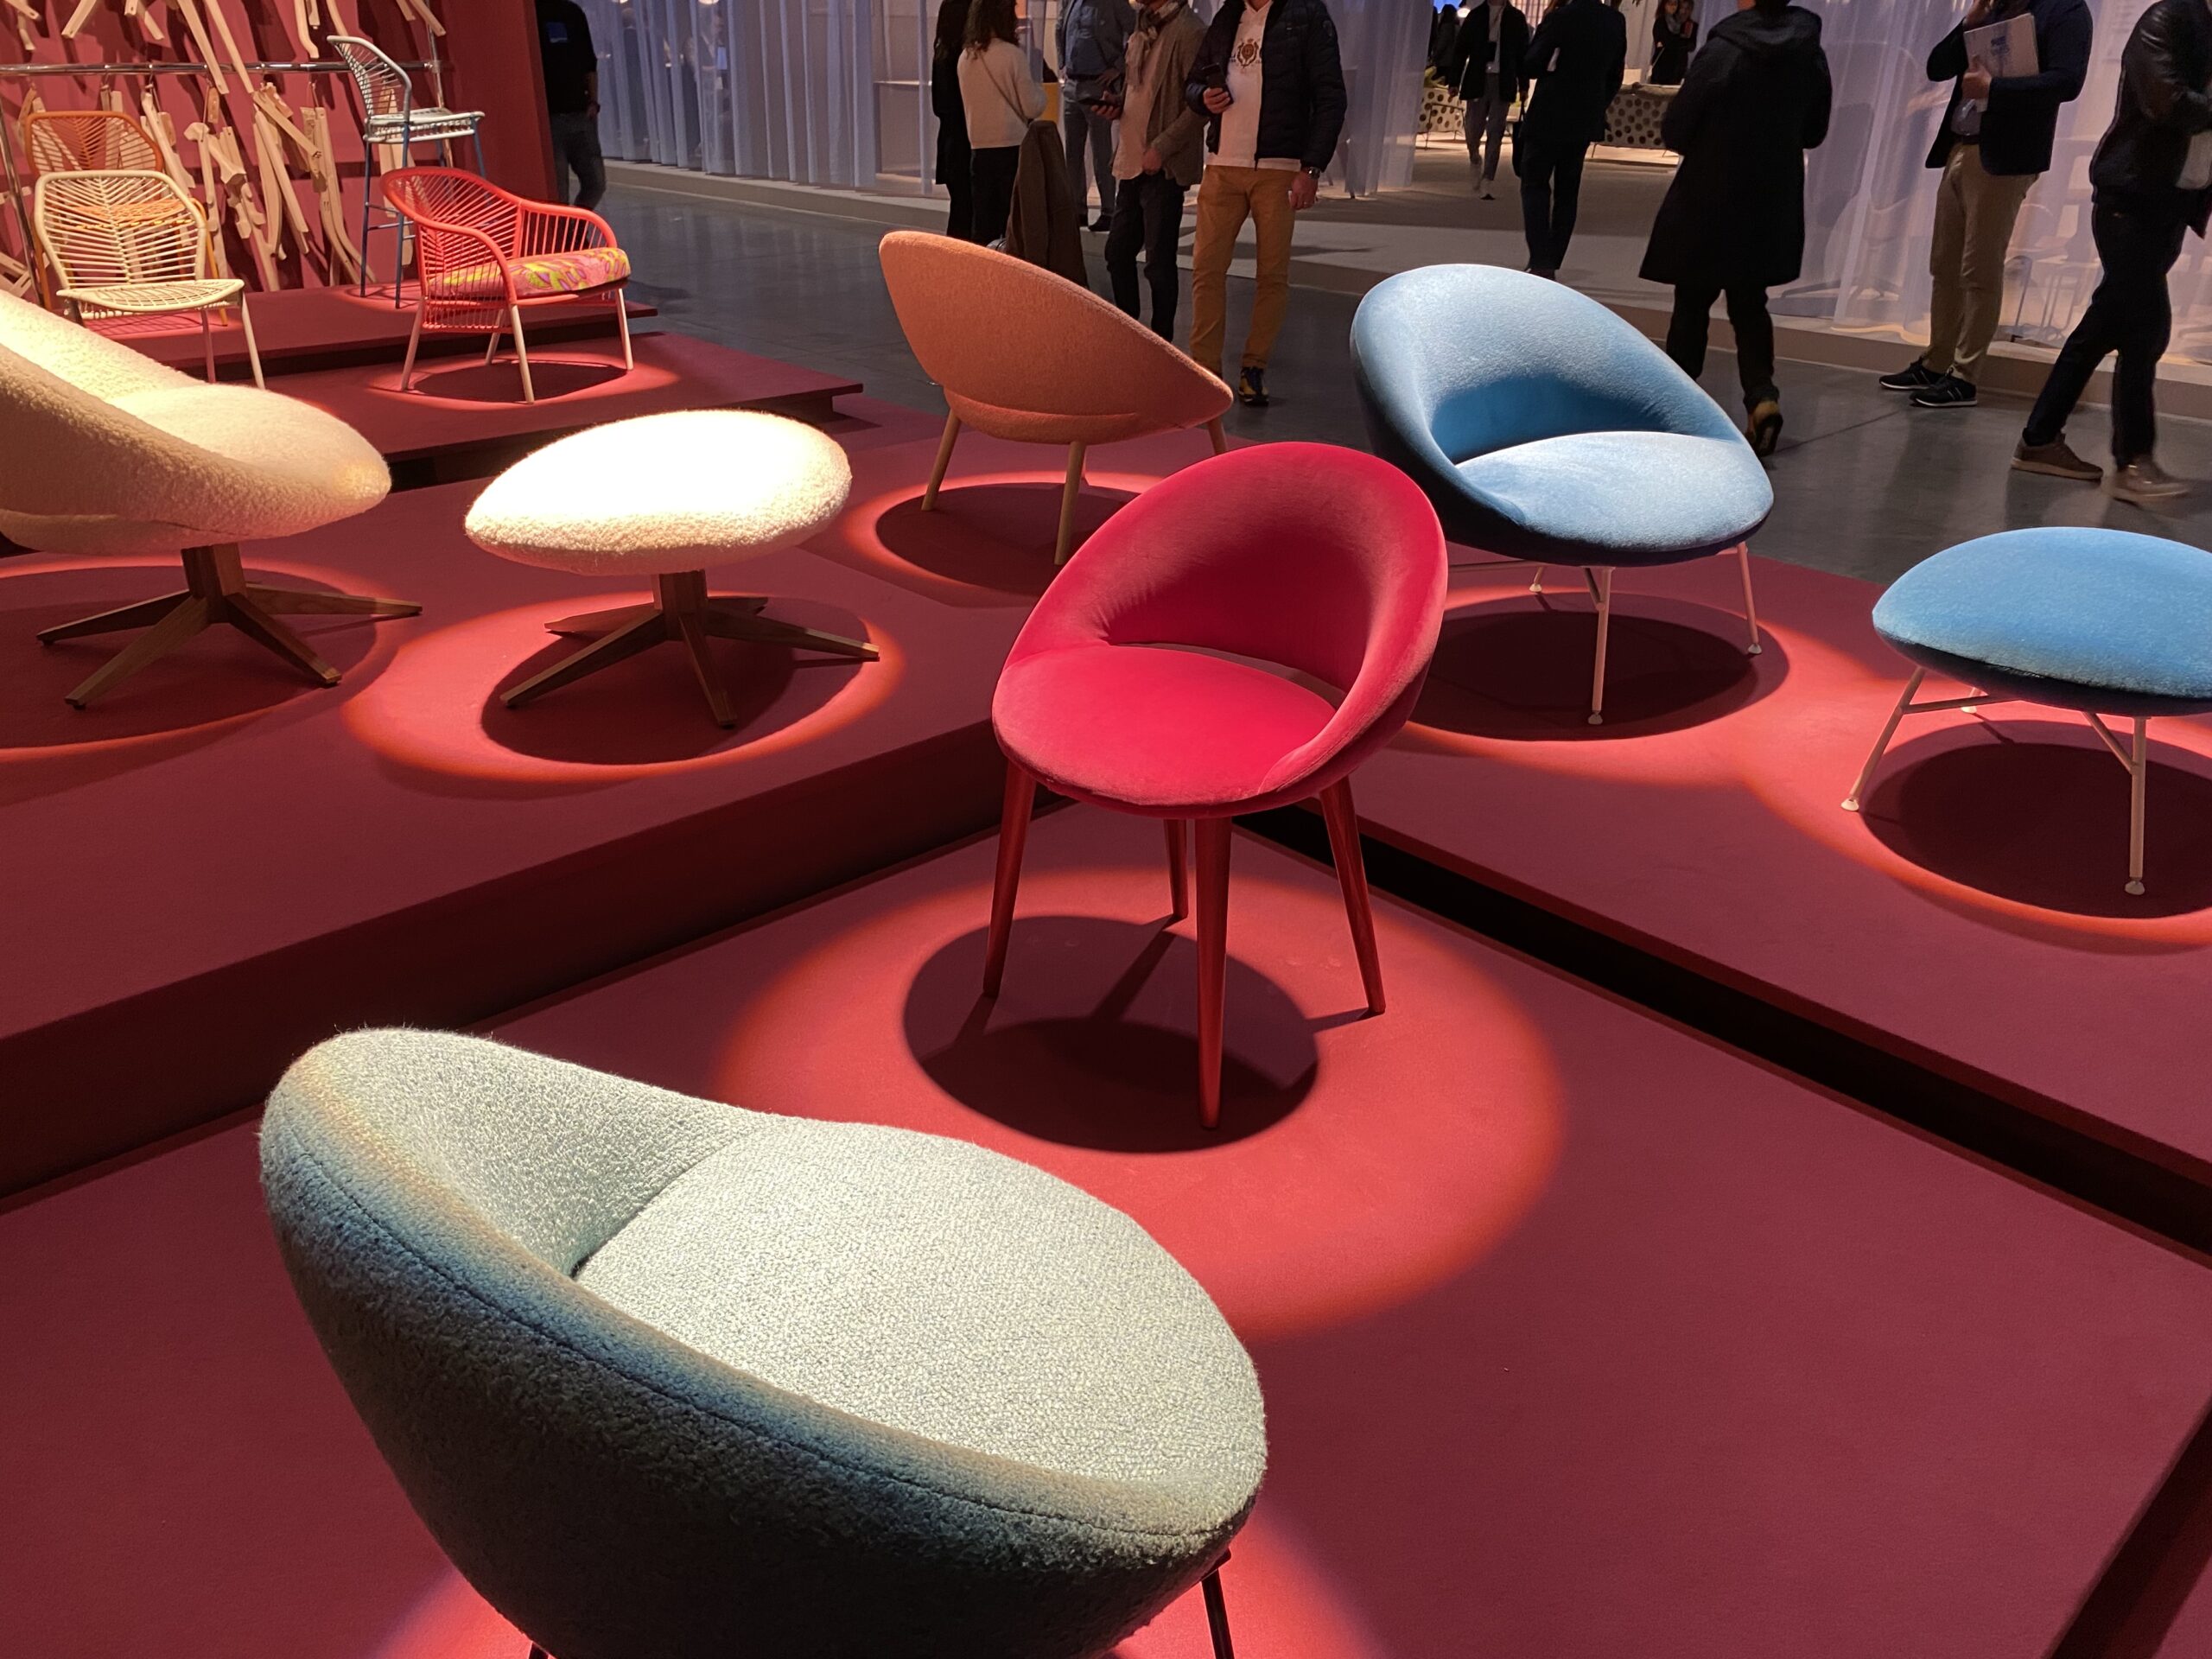 The uncompromising return of color and nature to the furniture industry. Inspiration from the design fair Salone del Mobile